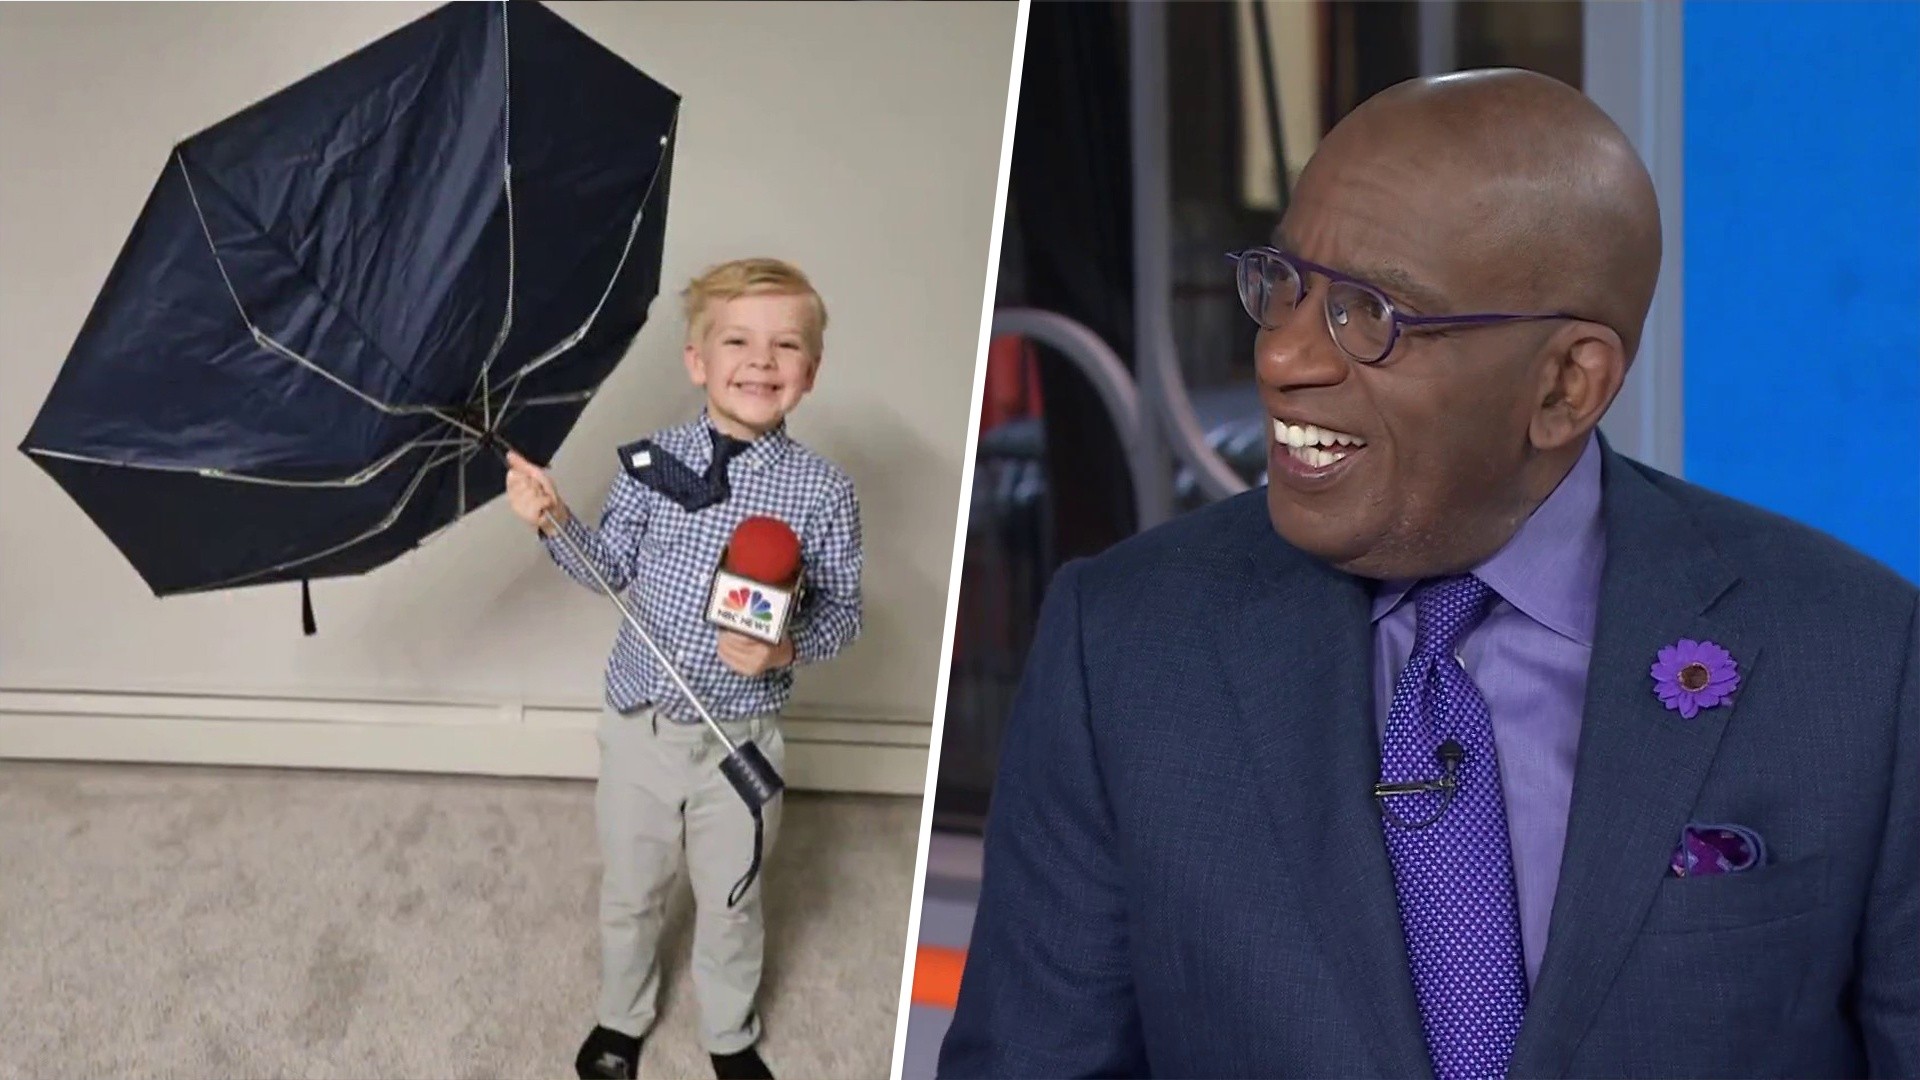 See 5-year-old dress up like Al Roker for Halloween